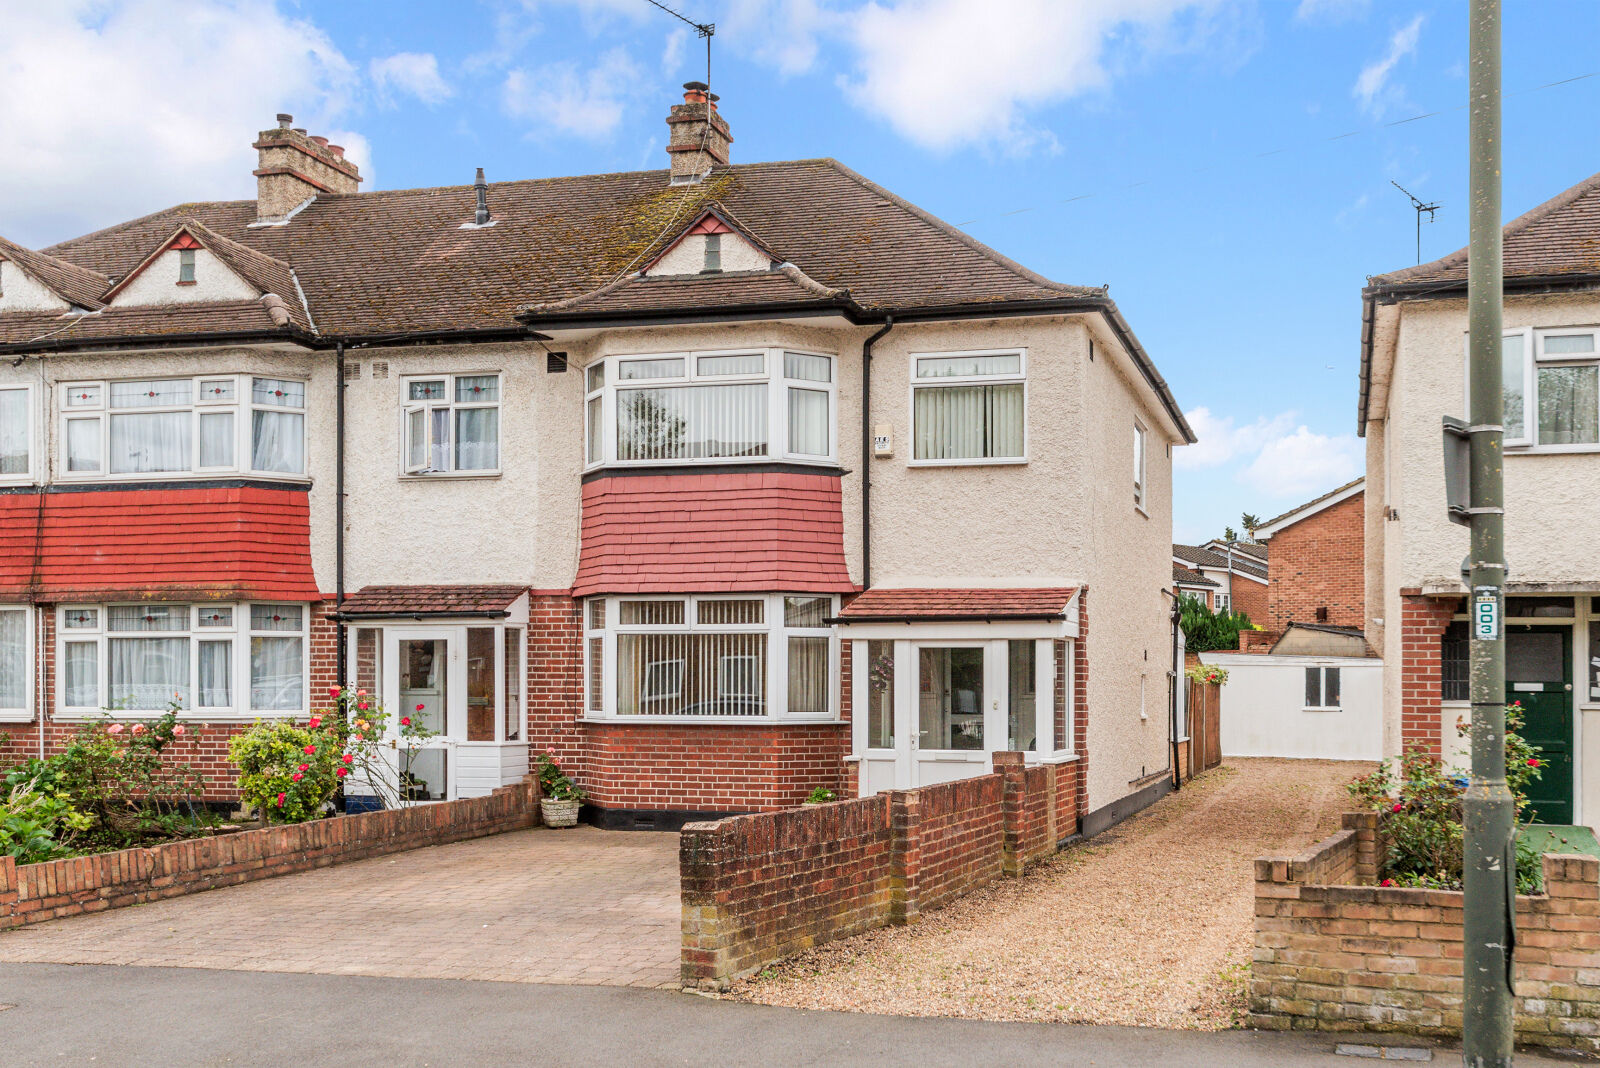 3 bedroom end terraced house for sale Wandle Road, Morden, SM4, main image